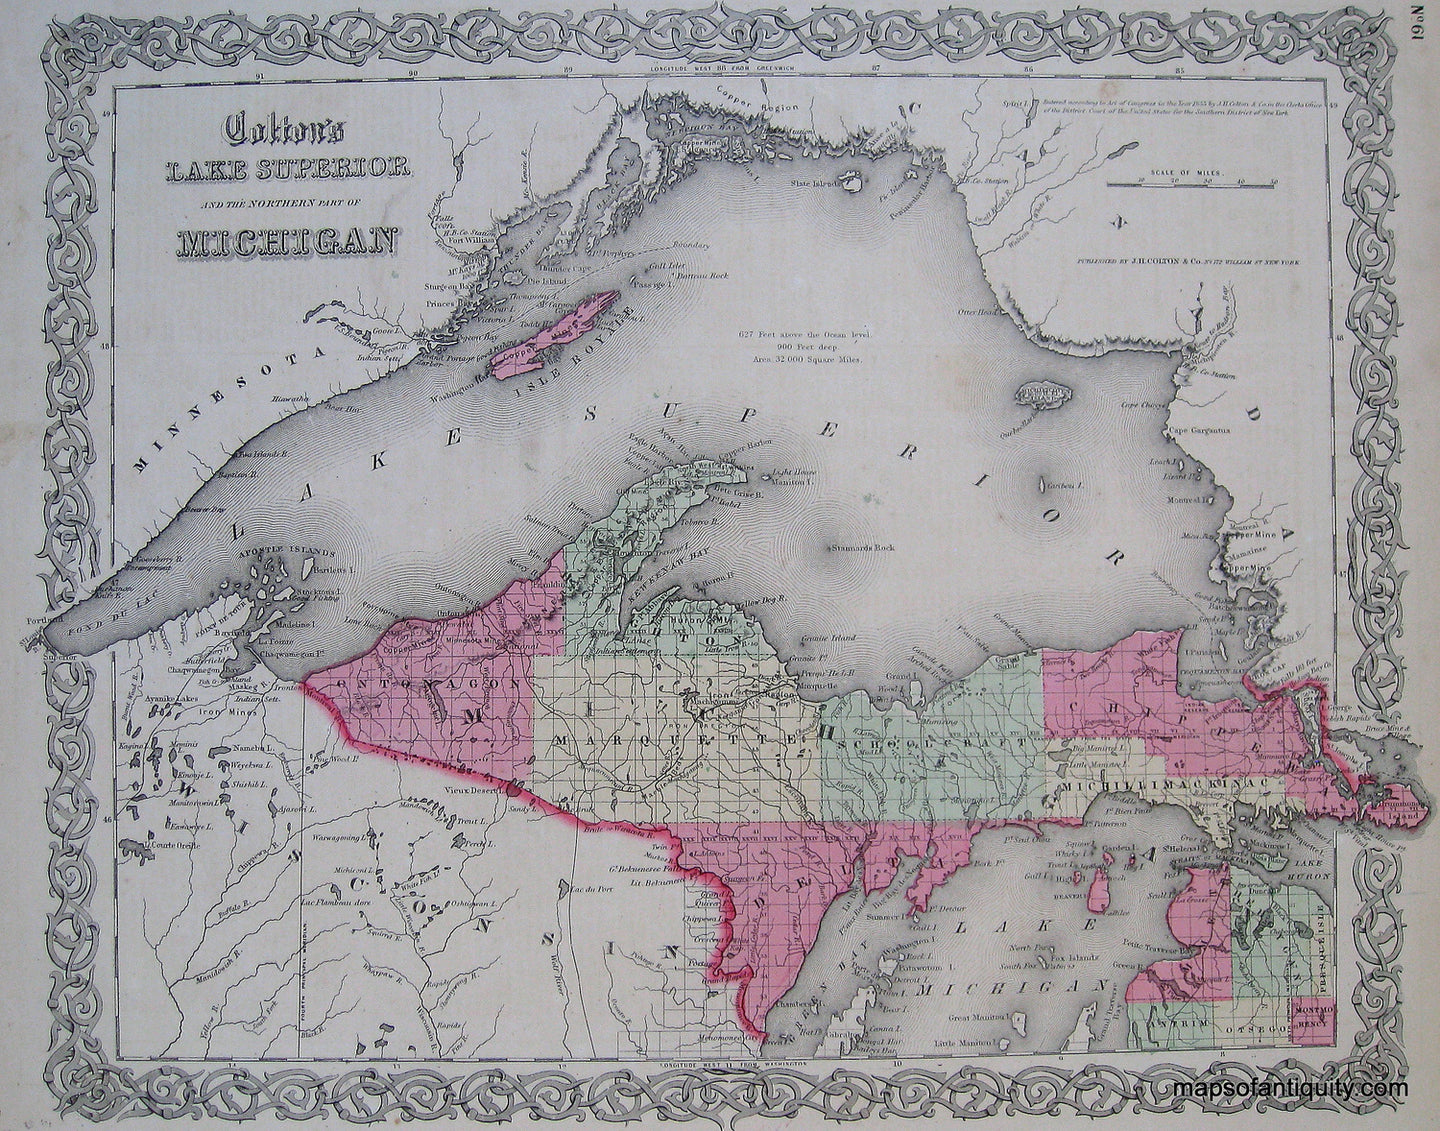 Antique-Hand-Colored-Map-Colton's-Lake-Superior-and-the-Northern-Part-of-Michigan--Colton's-Michigan-******-United-States-Michigan-1865-Colton-Maps-Of-Antiquity